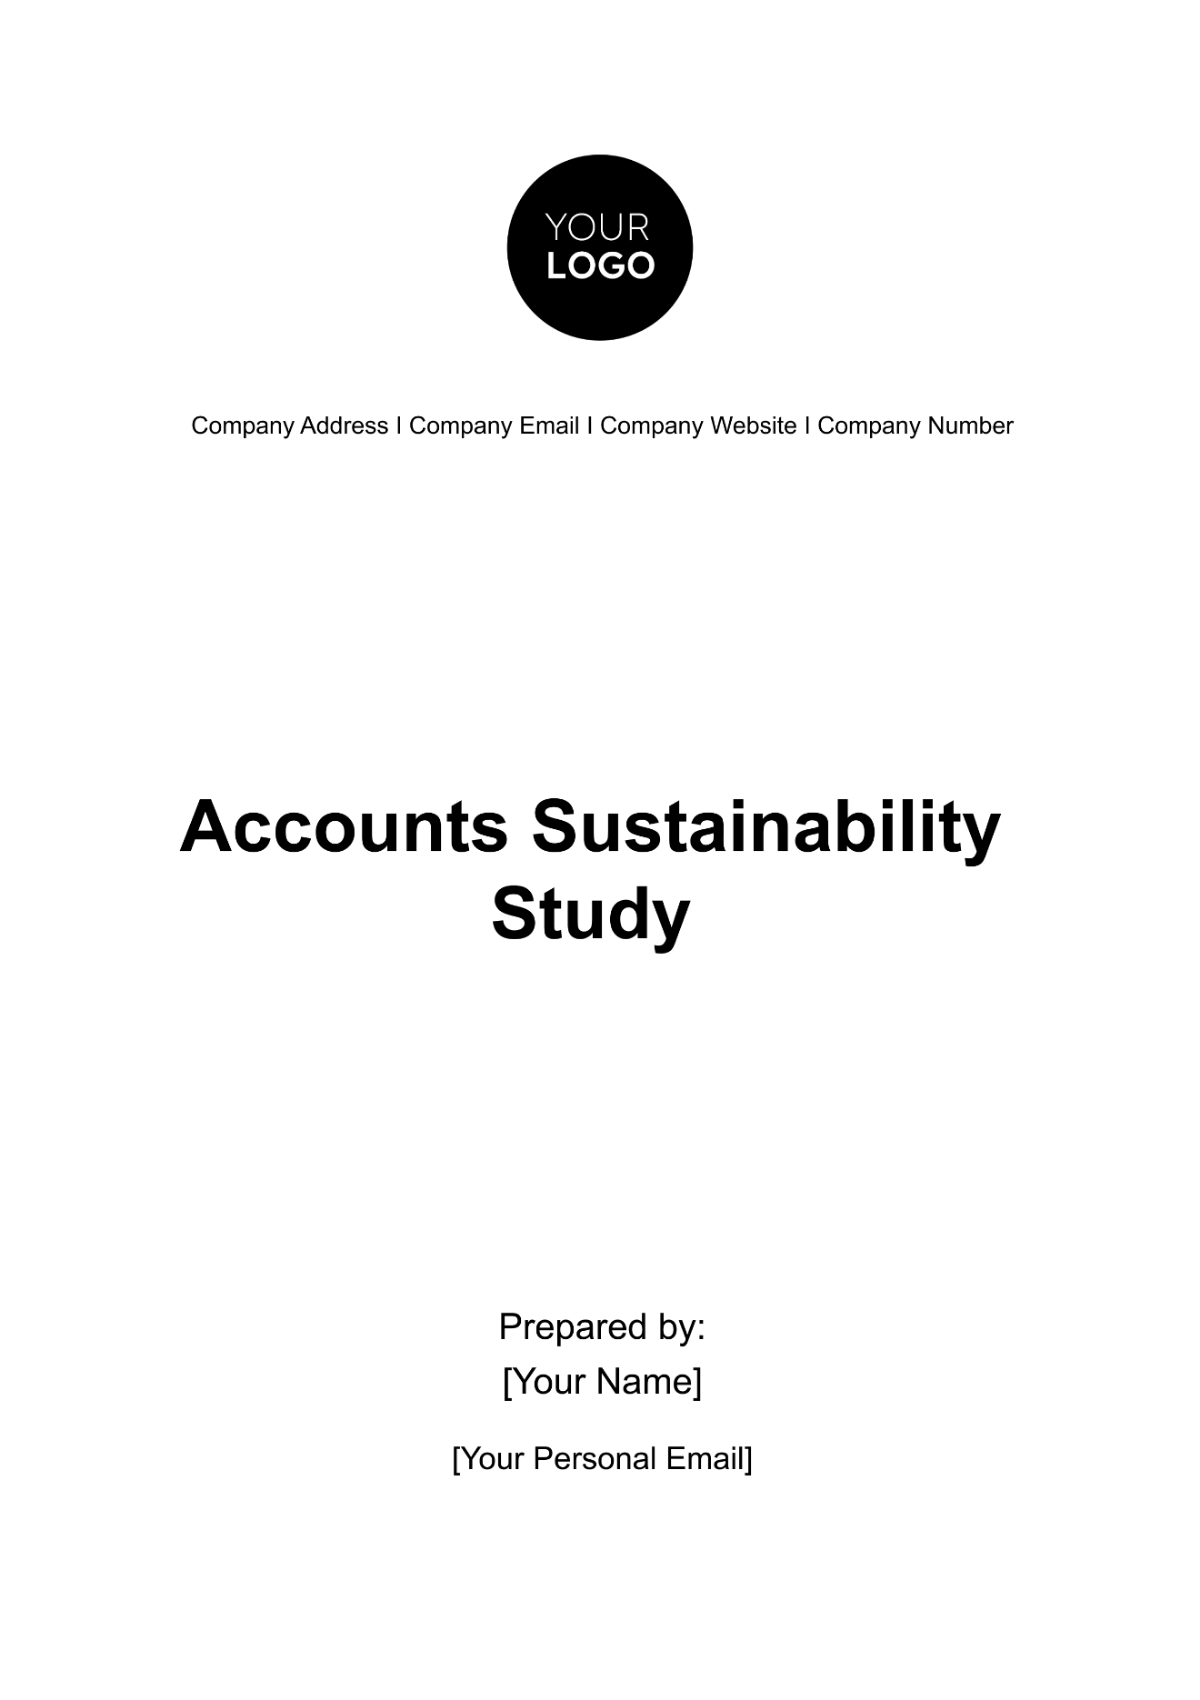 Accounts Sustainability Study Template